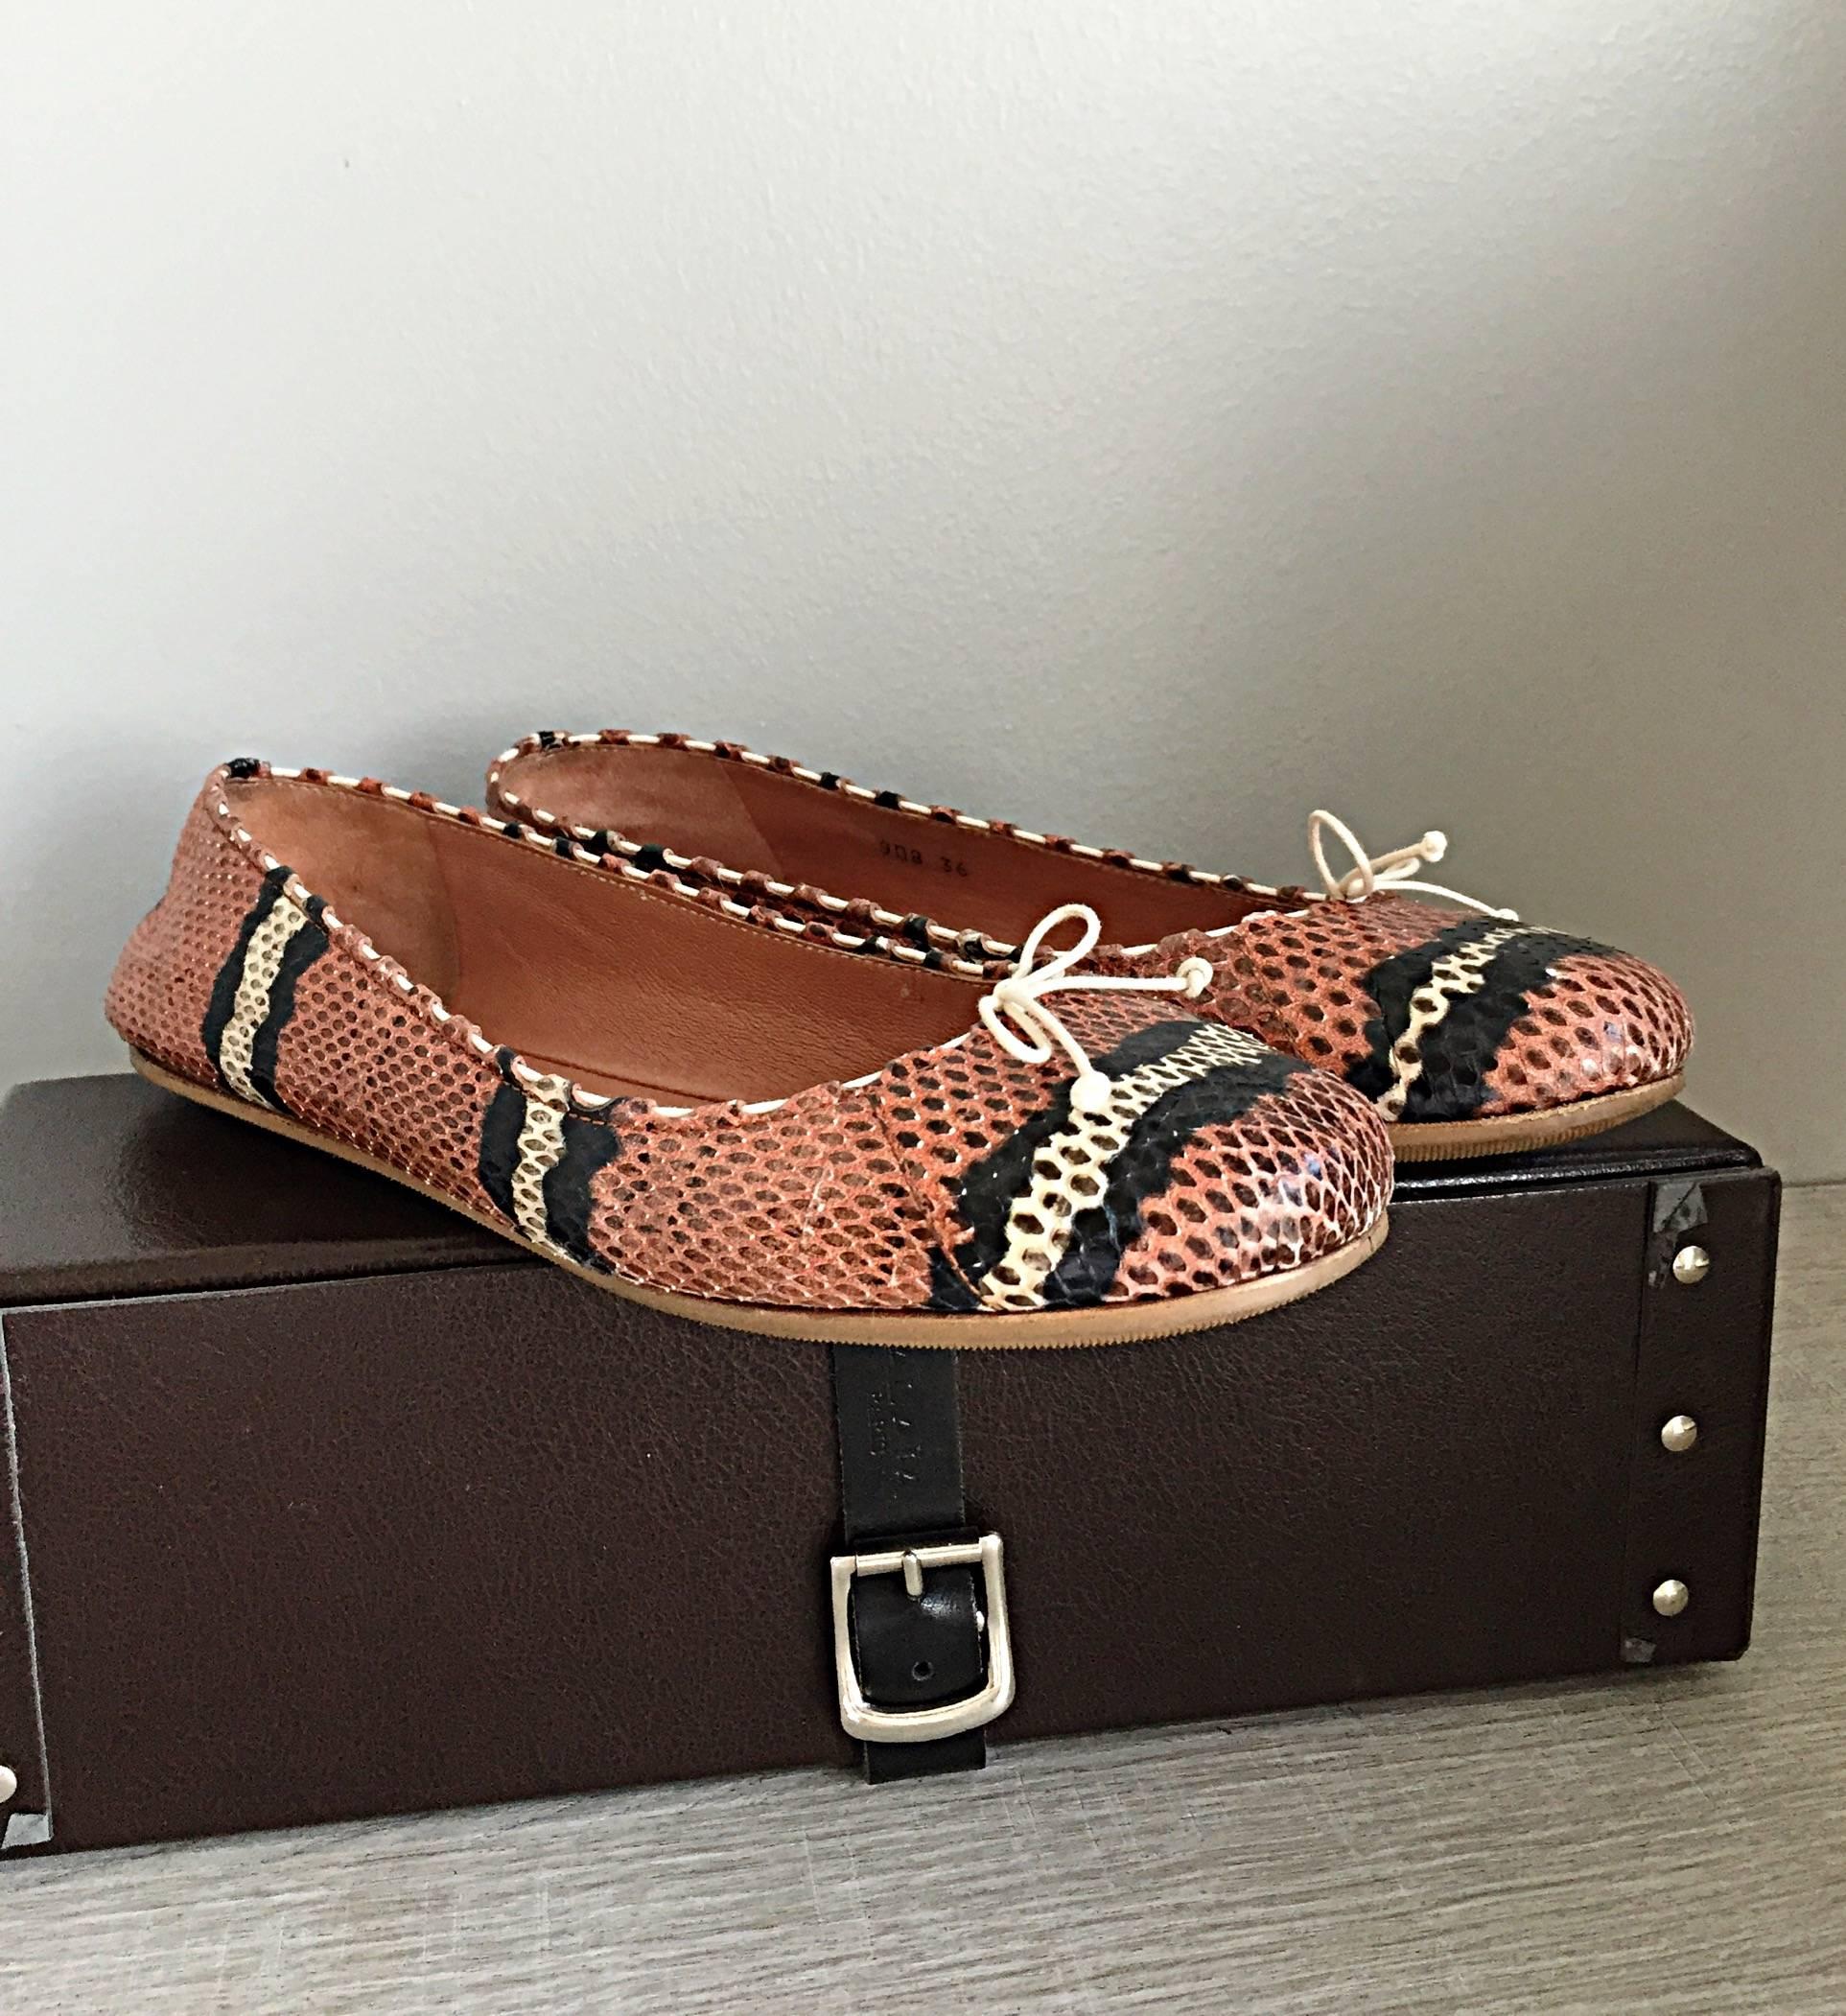 Awesome pair of ALAIA python ballet flats! Perfect combination of pink, brown, black and cream, that can be worn with everything all year! Comes with original unique Alaia shoebox. Super comfortable, and great bare legged, or with stockings. Flirty